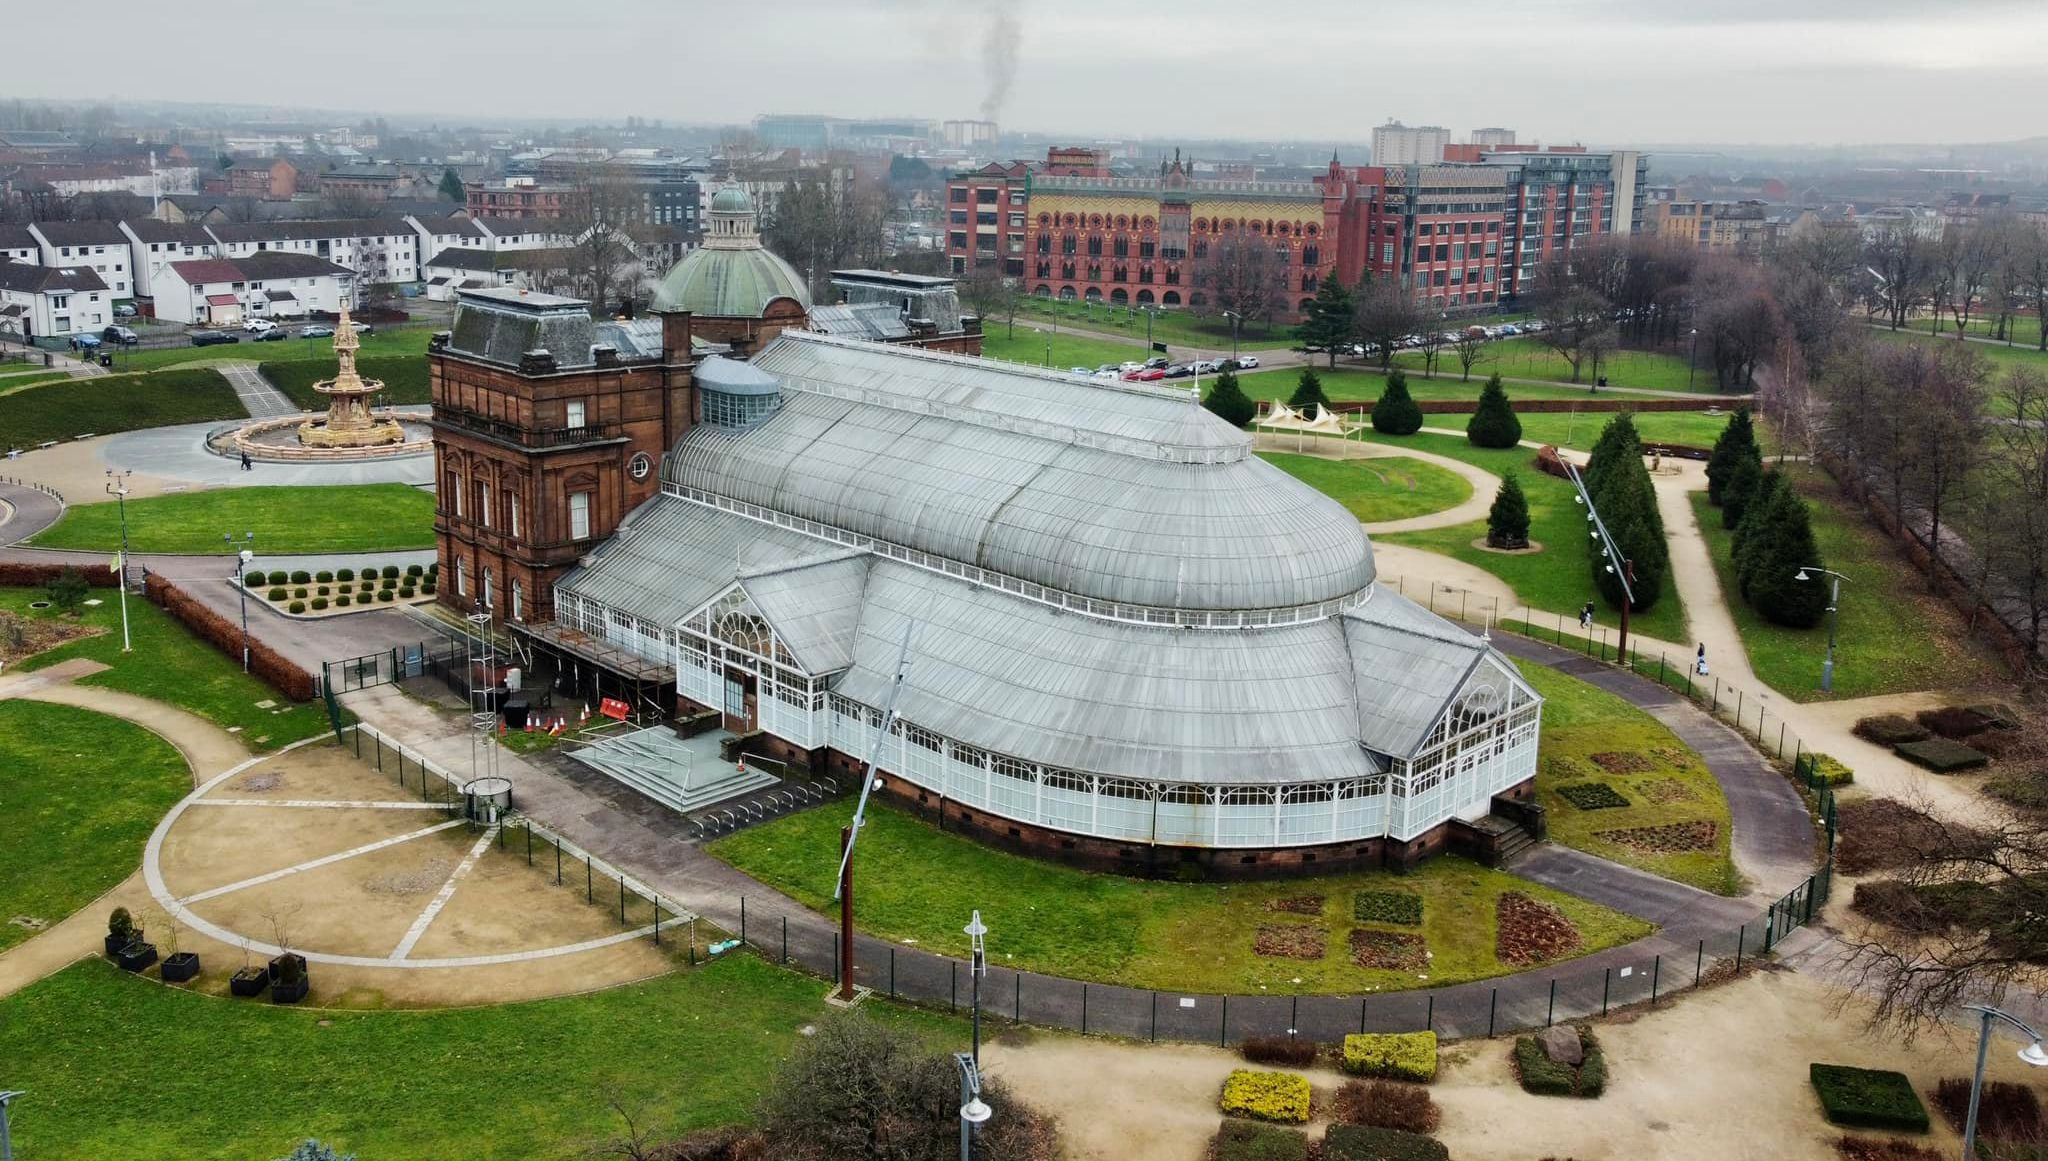 Aerial view of People's Palace in Glasgow Green